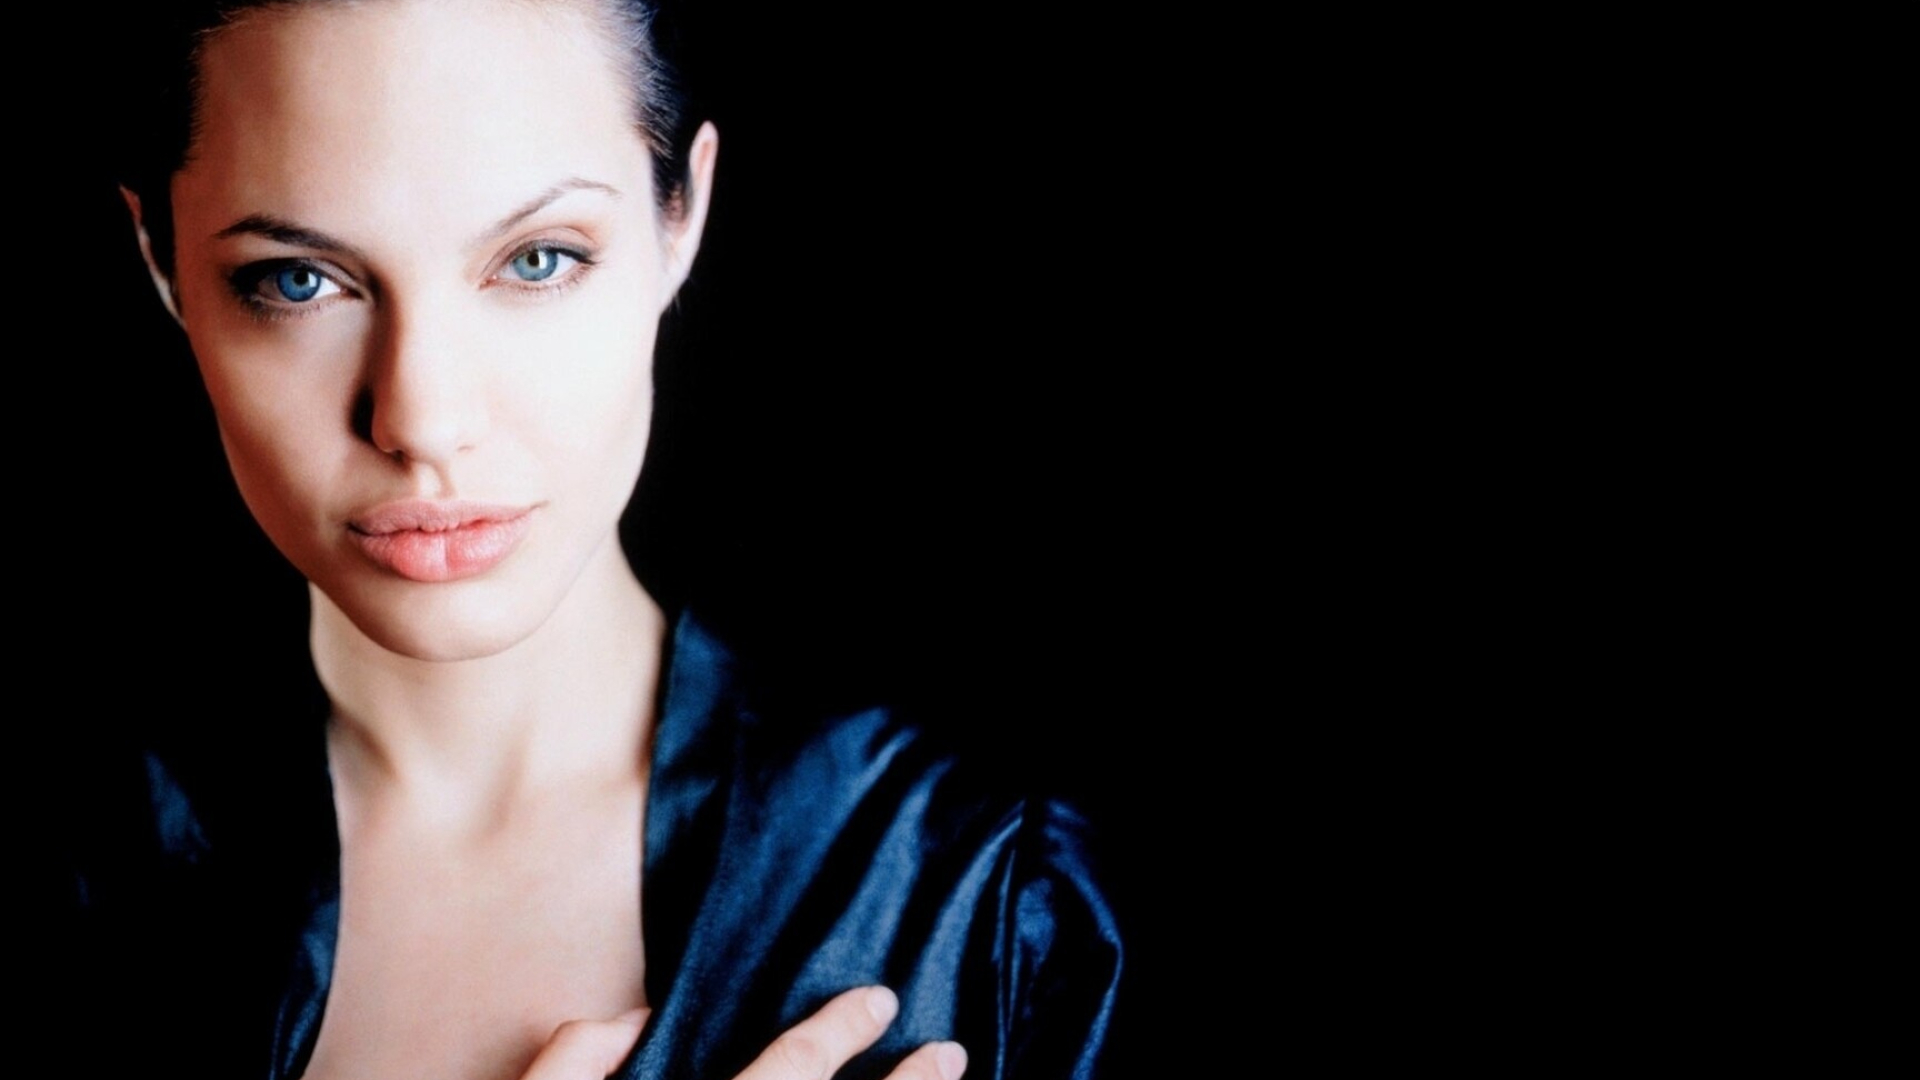 Angelina Jolie: One of Hollywood's most in-demand stars. 1920x1080 Full HD Wallpaper.